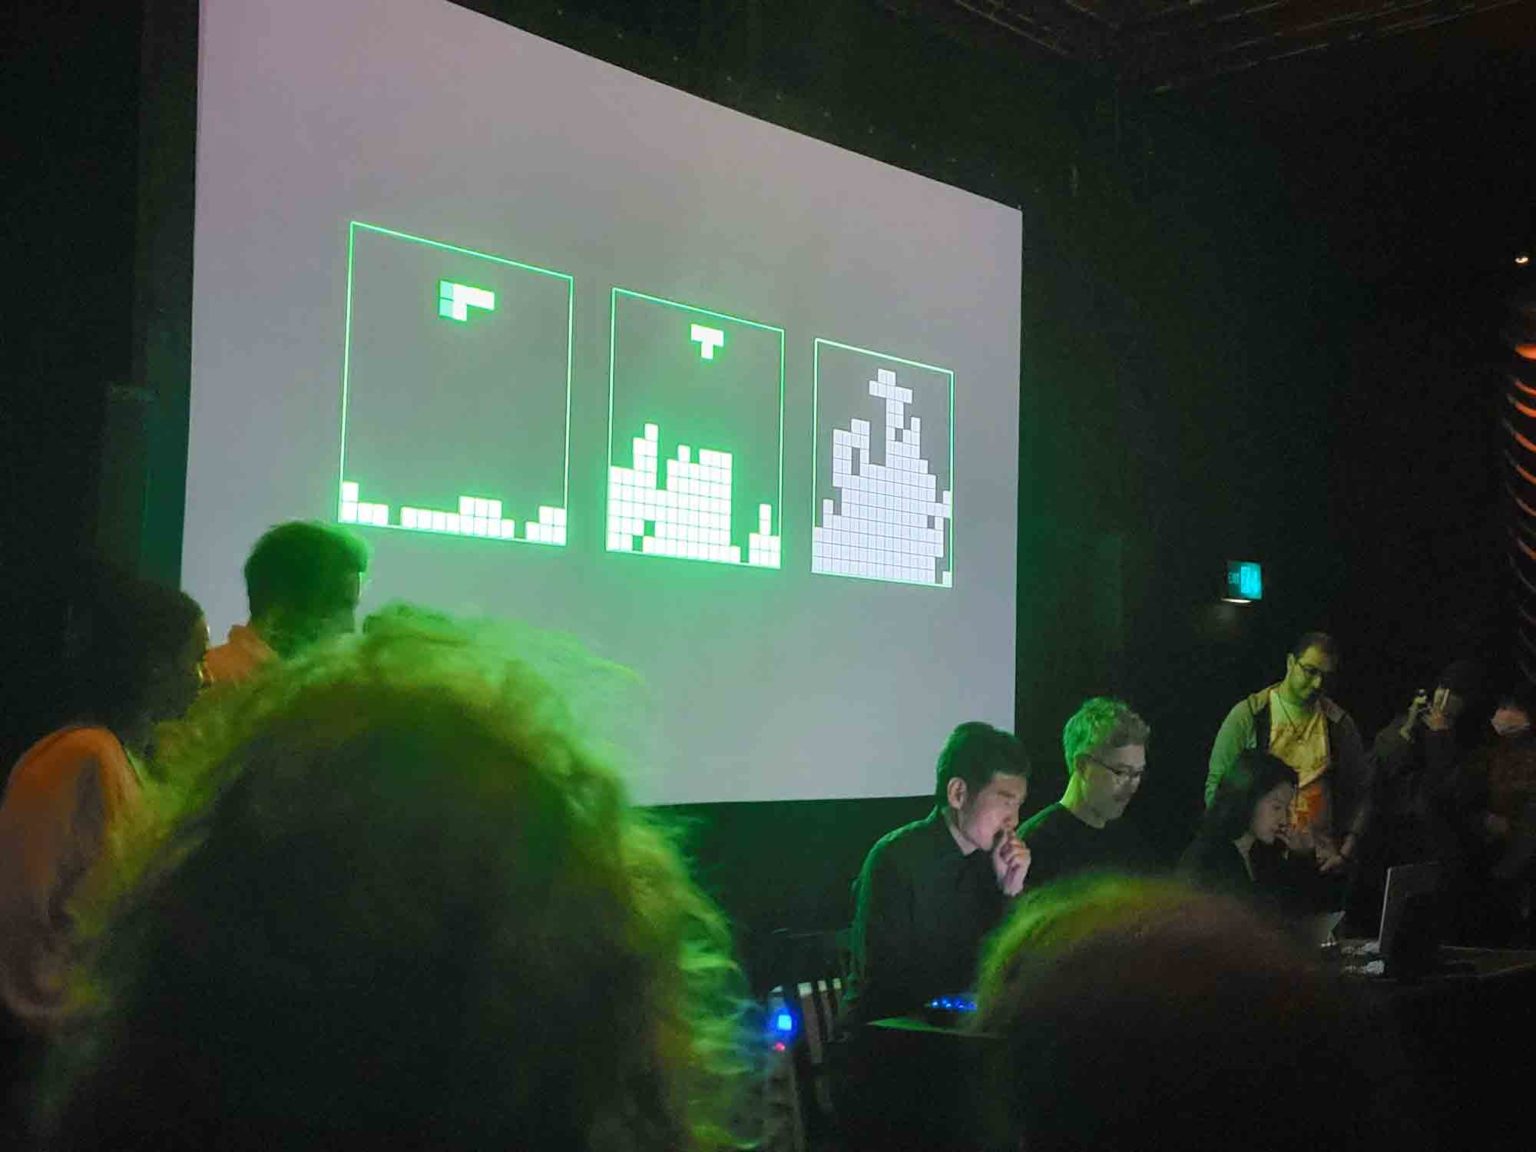 Tetris projections added to the experience and the tension